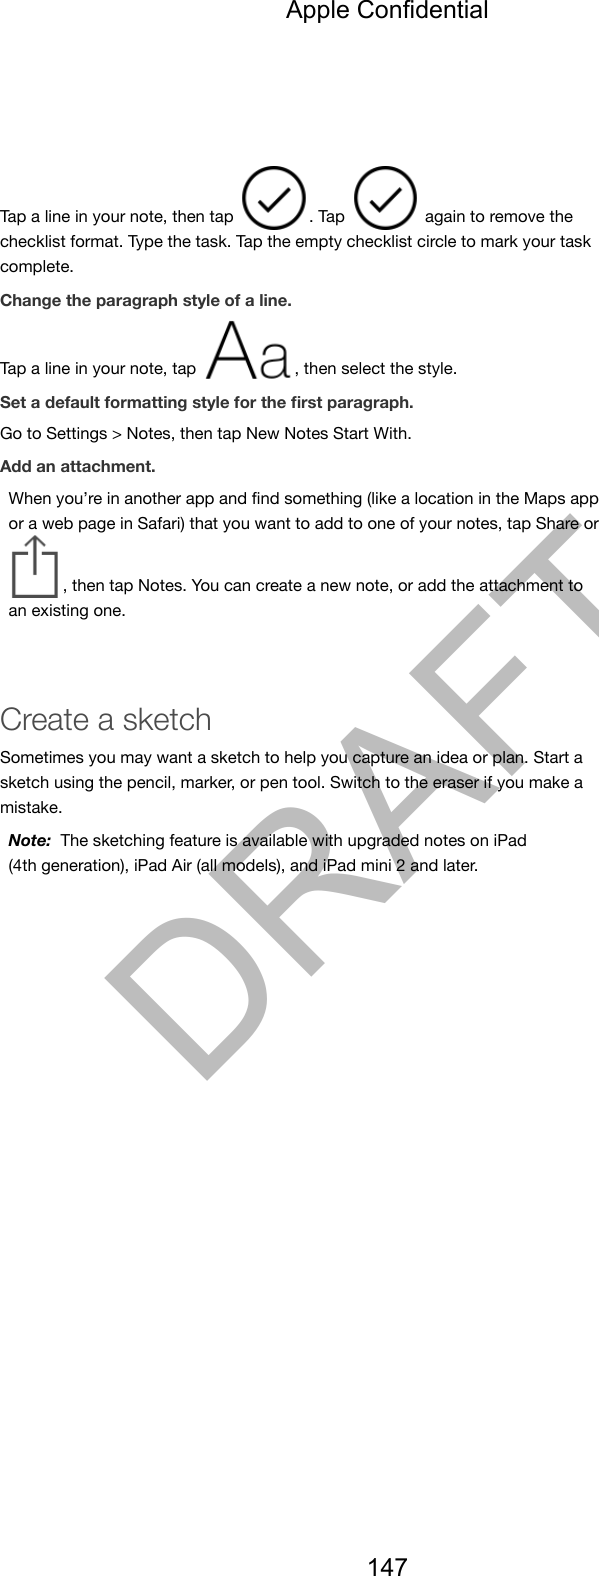 Tap a line in your note, then tap  . Tap   again to remove thechecklist format. Type the task. Tap the empty checklist circle to mark your taskcomplete.Change the paragraph style of a line. Tap a line in your note, tap  , then select the style.Set a default formatting style for the ﬁrst paragraph.Go to Settings &gt; Notes, then tap New Notes Start With.Add an attachment.When you’re in another app and ﬁnd something (like a location in the Maps appor a web page in Safari) that you want to add to one of your notes, tap Share or, then tap Notes. You can create a new note, or add the attachment toan existing one.Create a sketchSometimes you may want a sketch to help you capture an idea or plan. Start asketch using the pencil, marker, or pen tool. Switch to the eraser if you make amistake.Note:  The sketching feature is available with upgraded notes on iPad(4th generation), iPad Air (all models), and iPad mini 2 and later.Apple Confidential147DRAFT